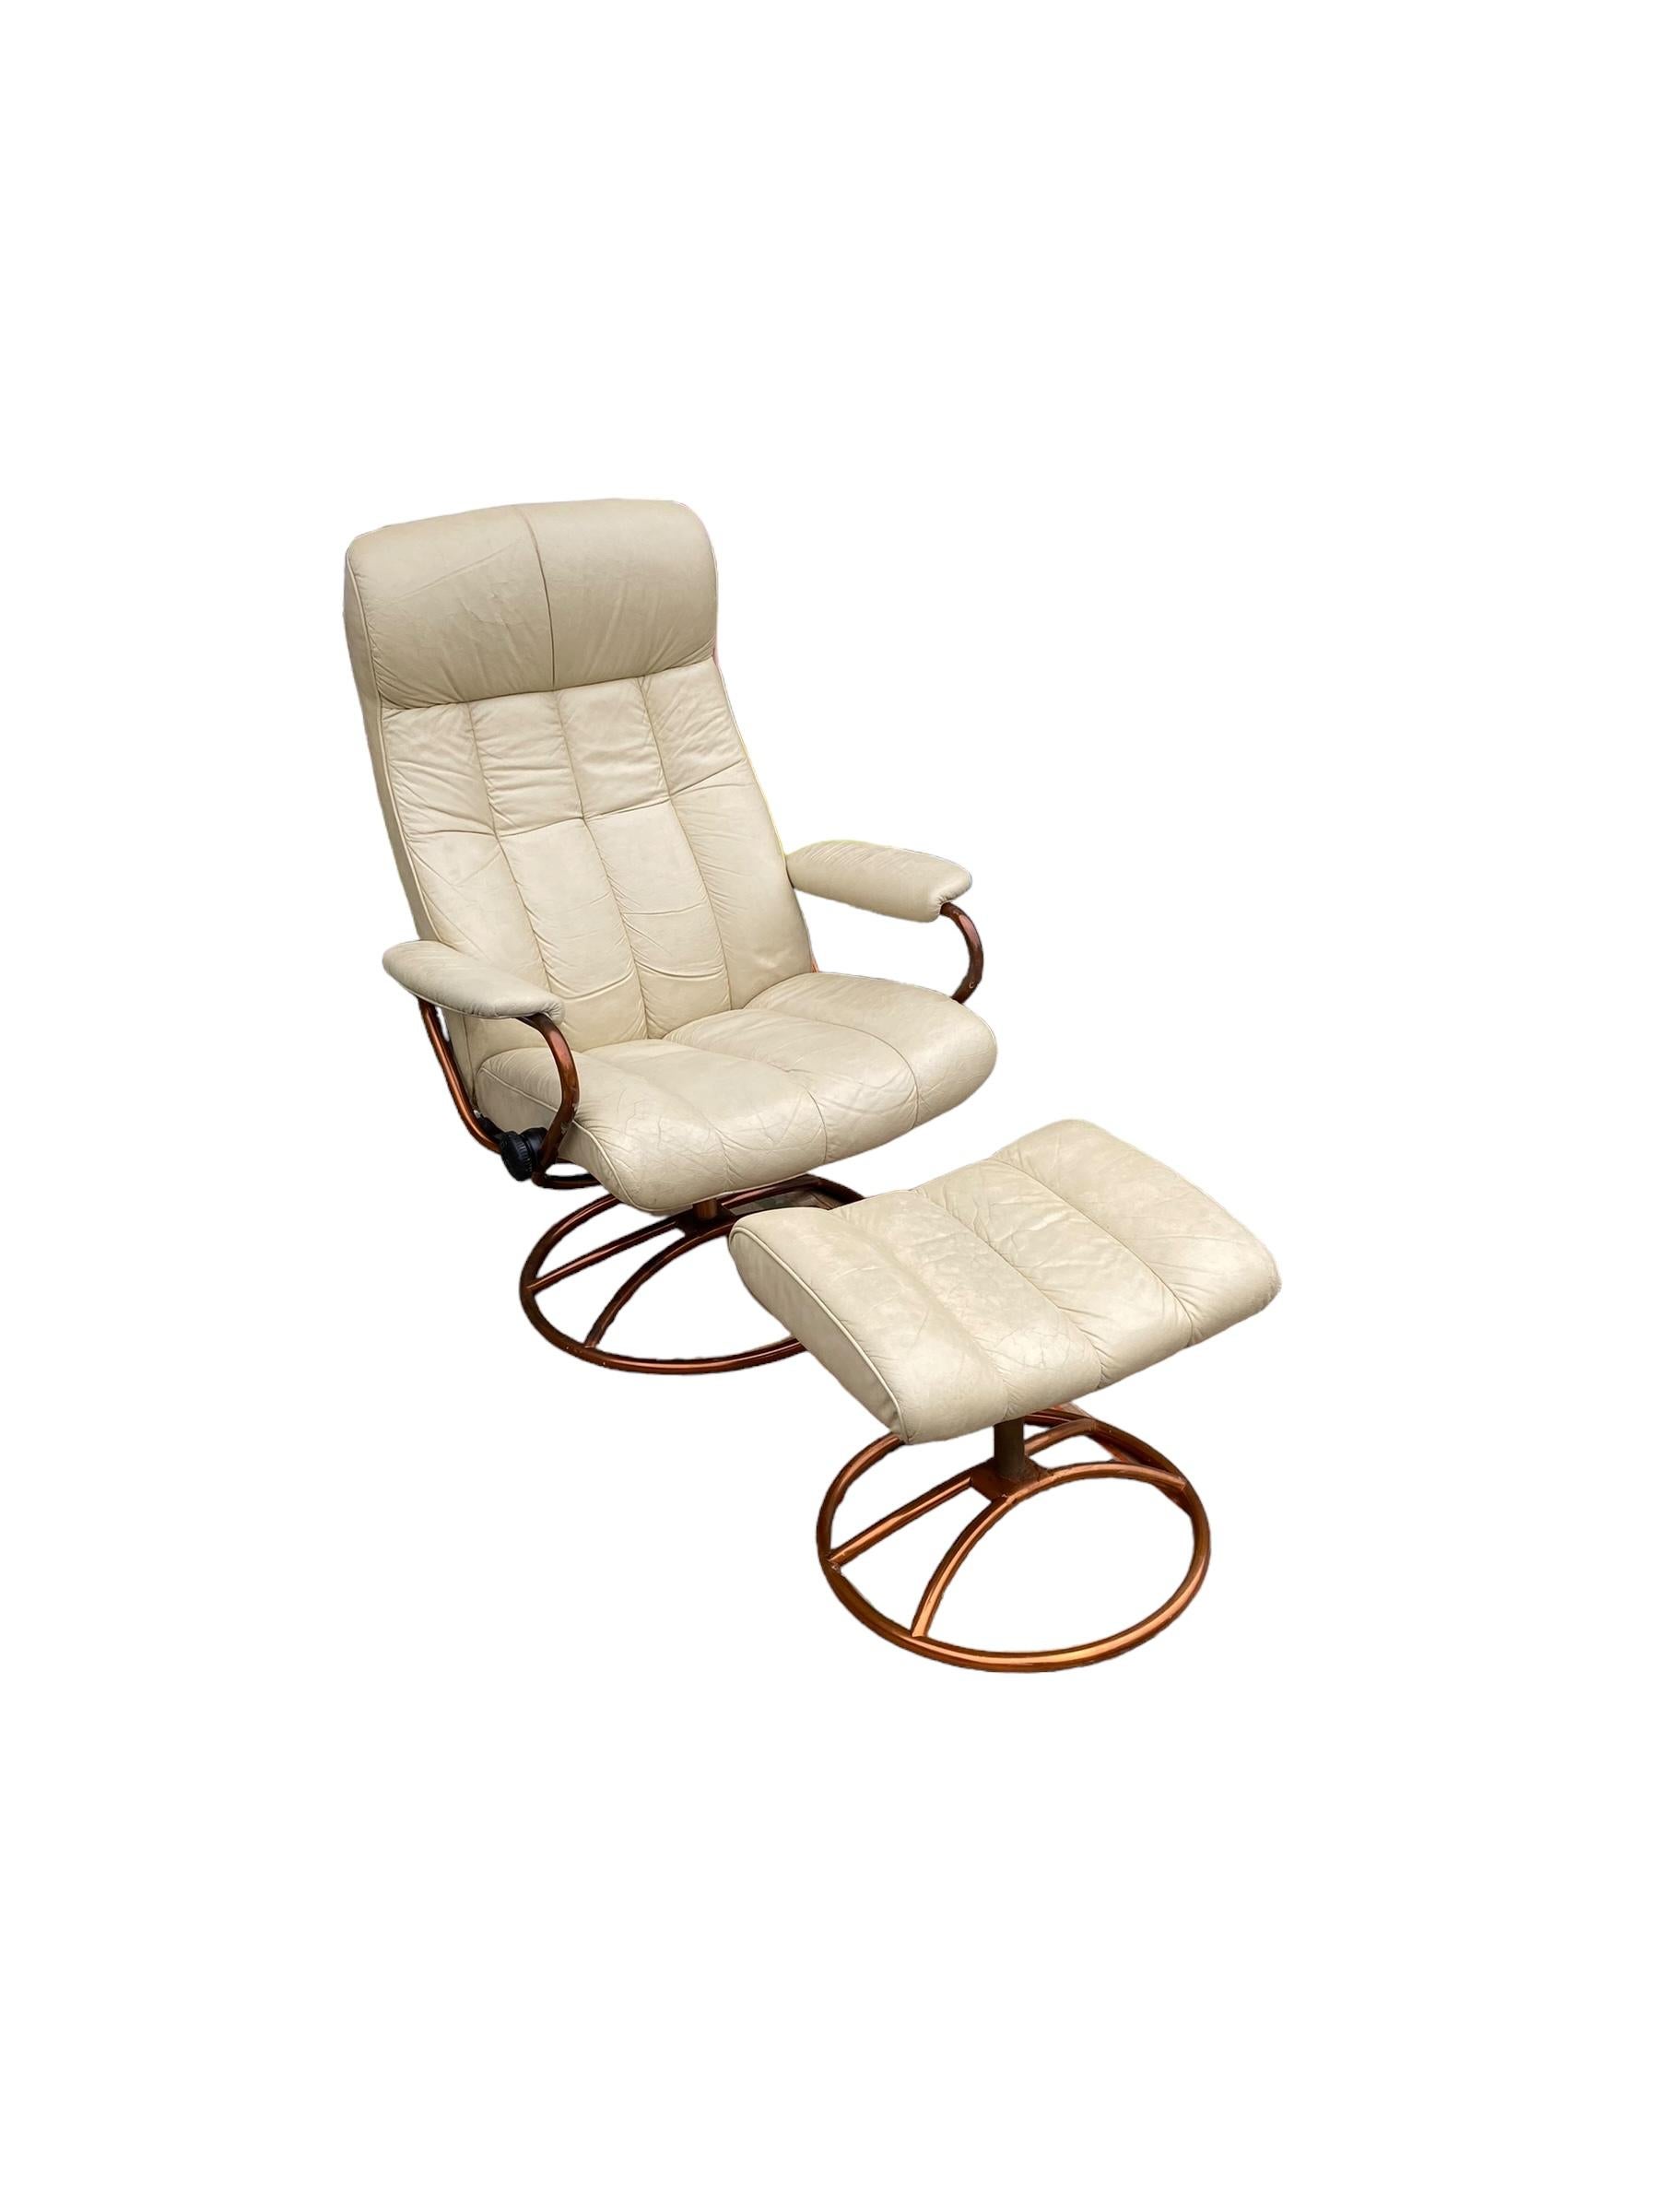 Post Modern Stressless Lounge Chair and Ottoman with copper frame For Sale 3